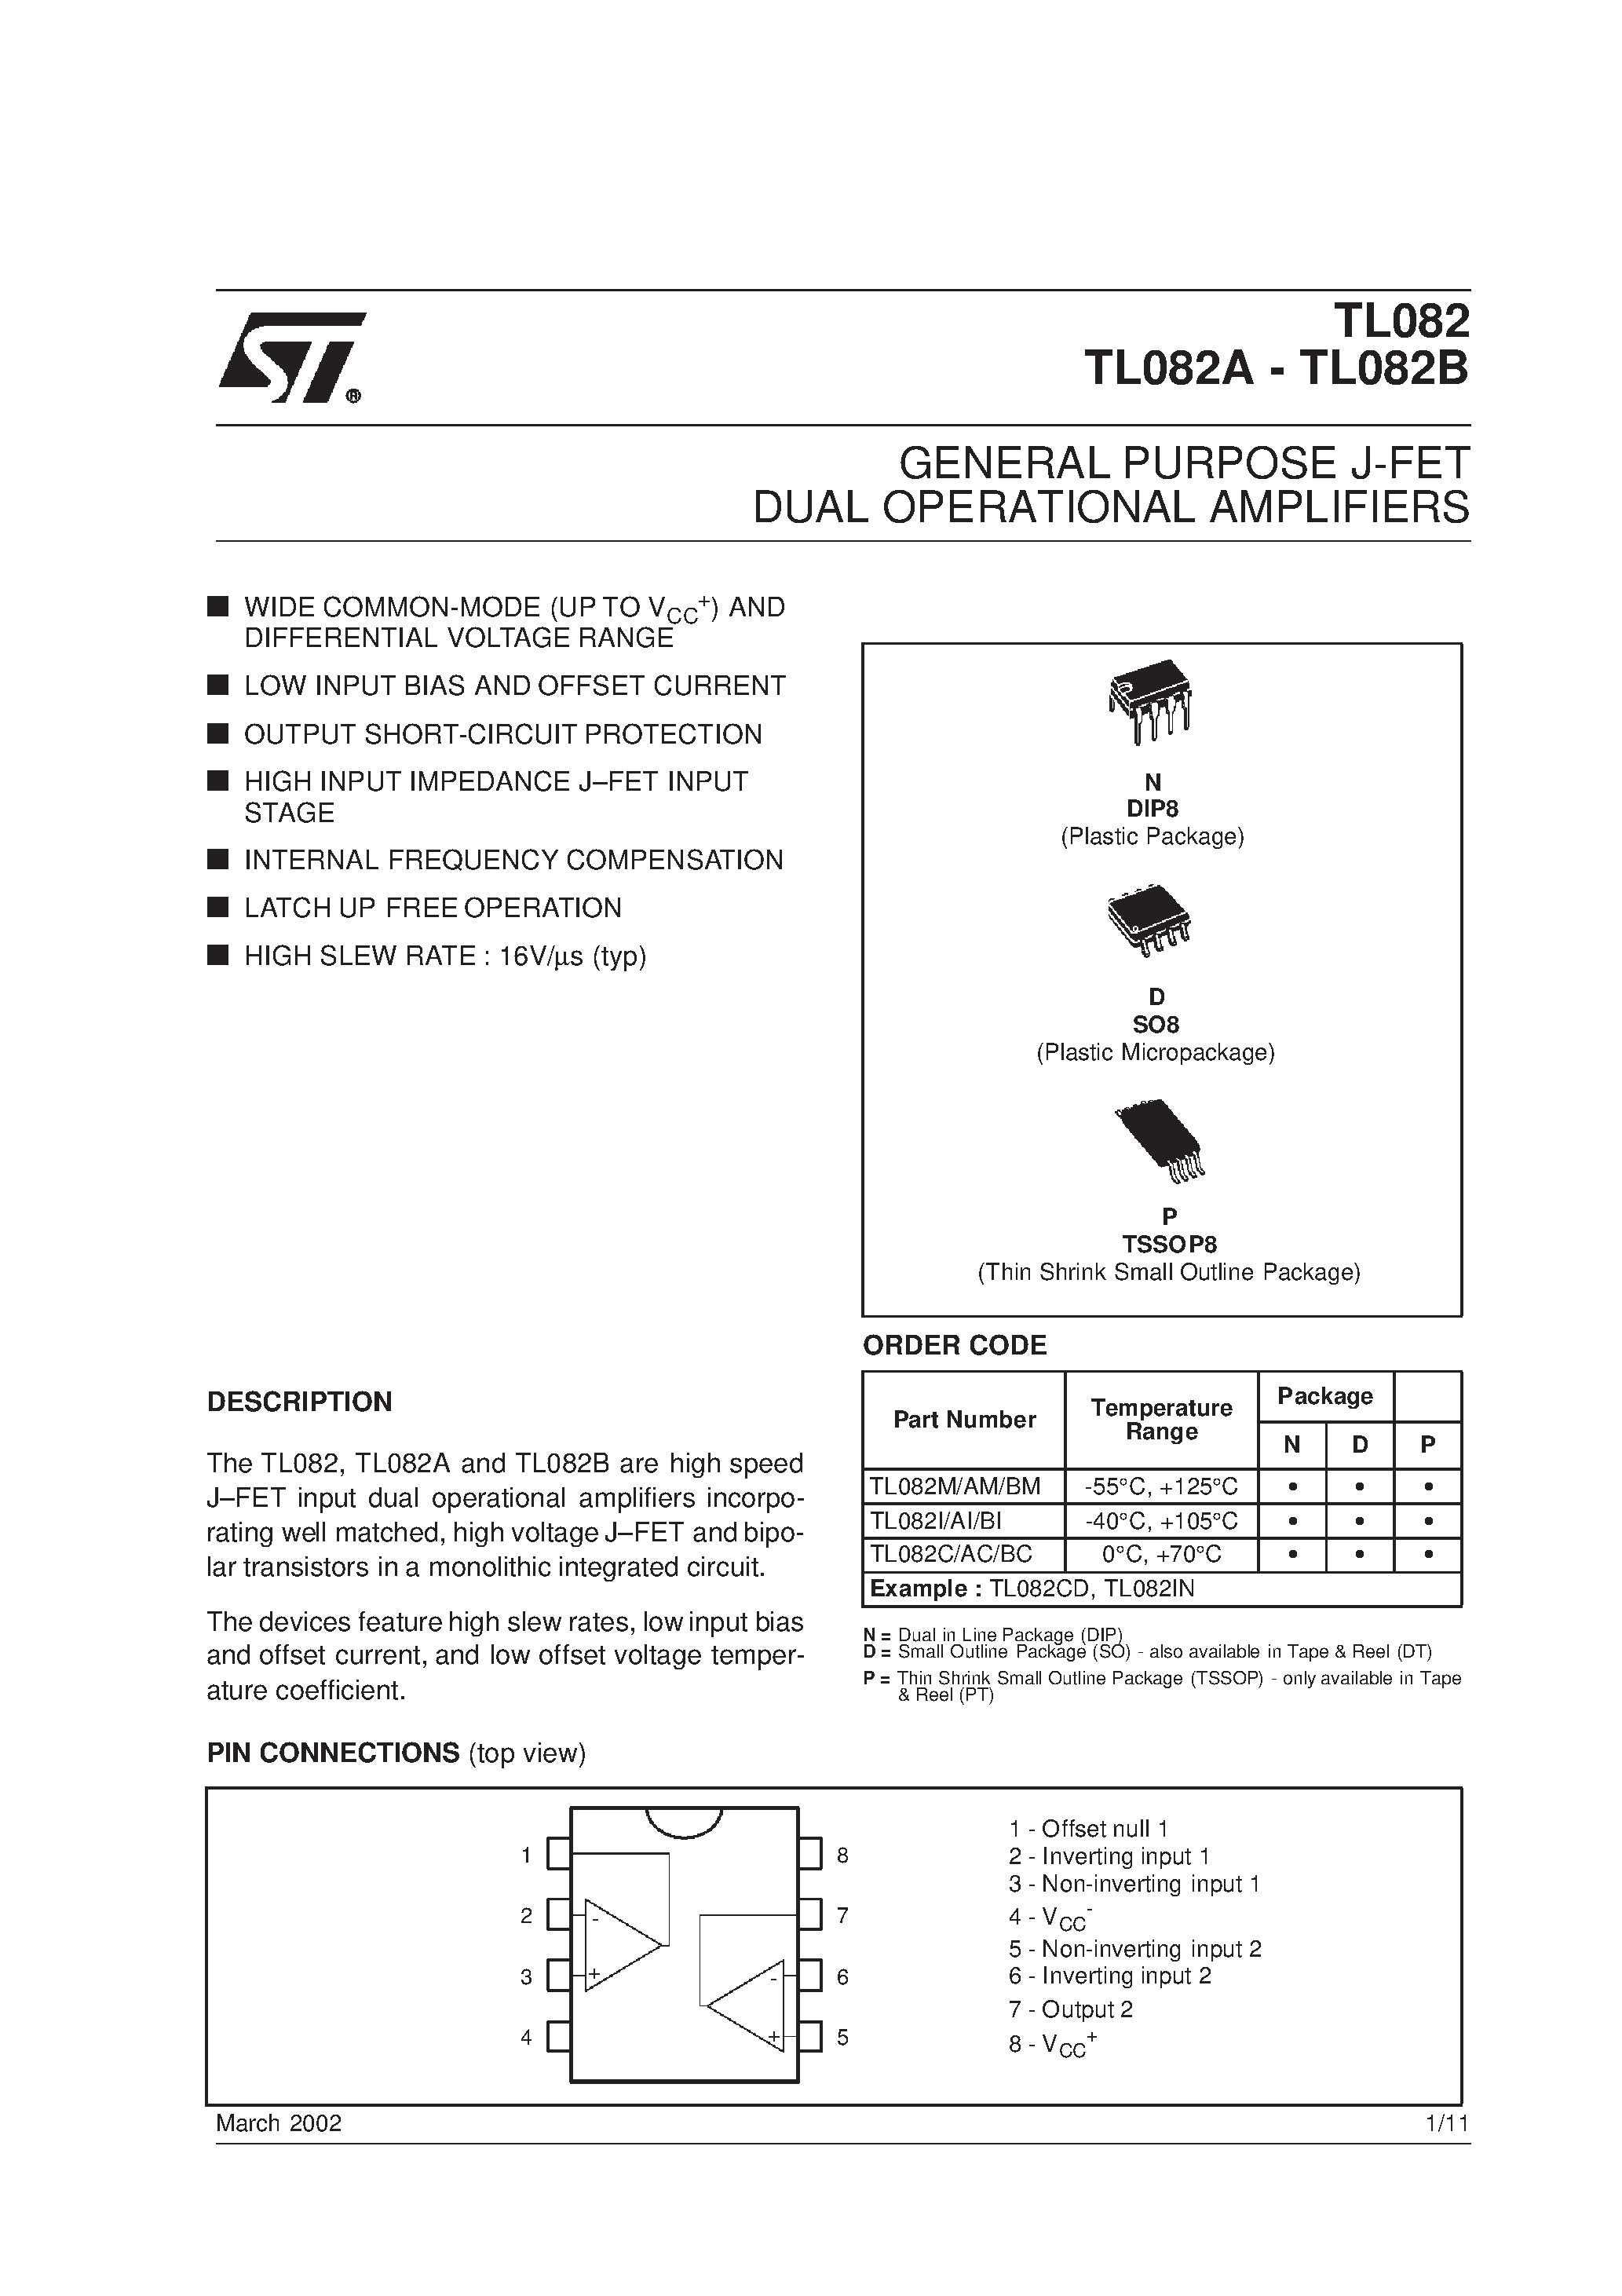 Datasheet TL082AID - GENERAL PURPOSE J-FET DUAL OPERATIONAL AMPLIFIERS page 1